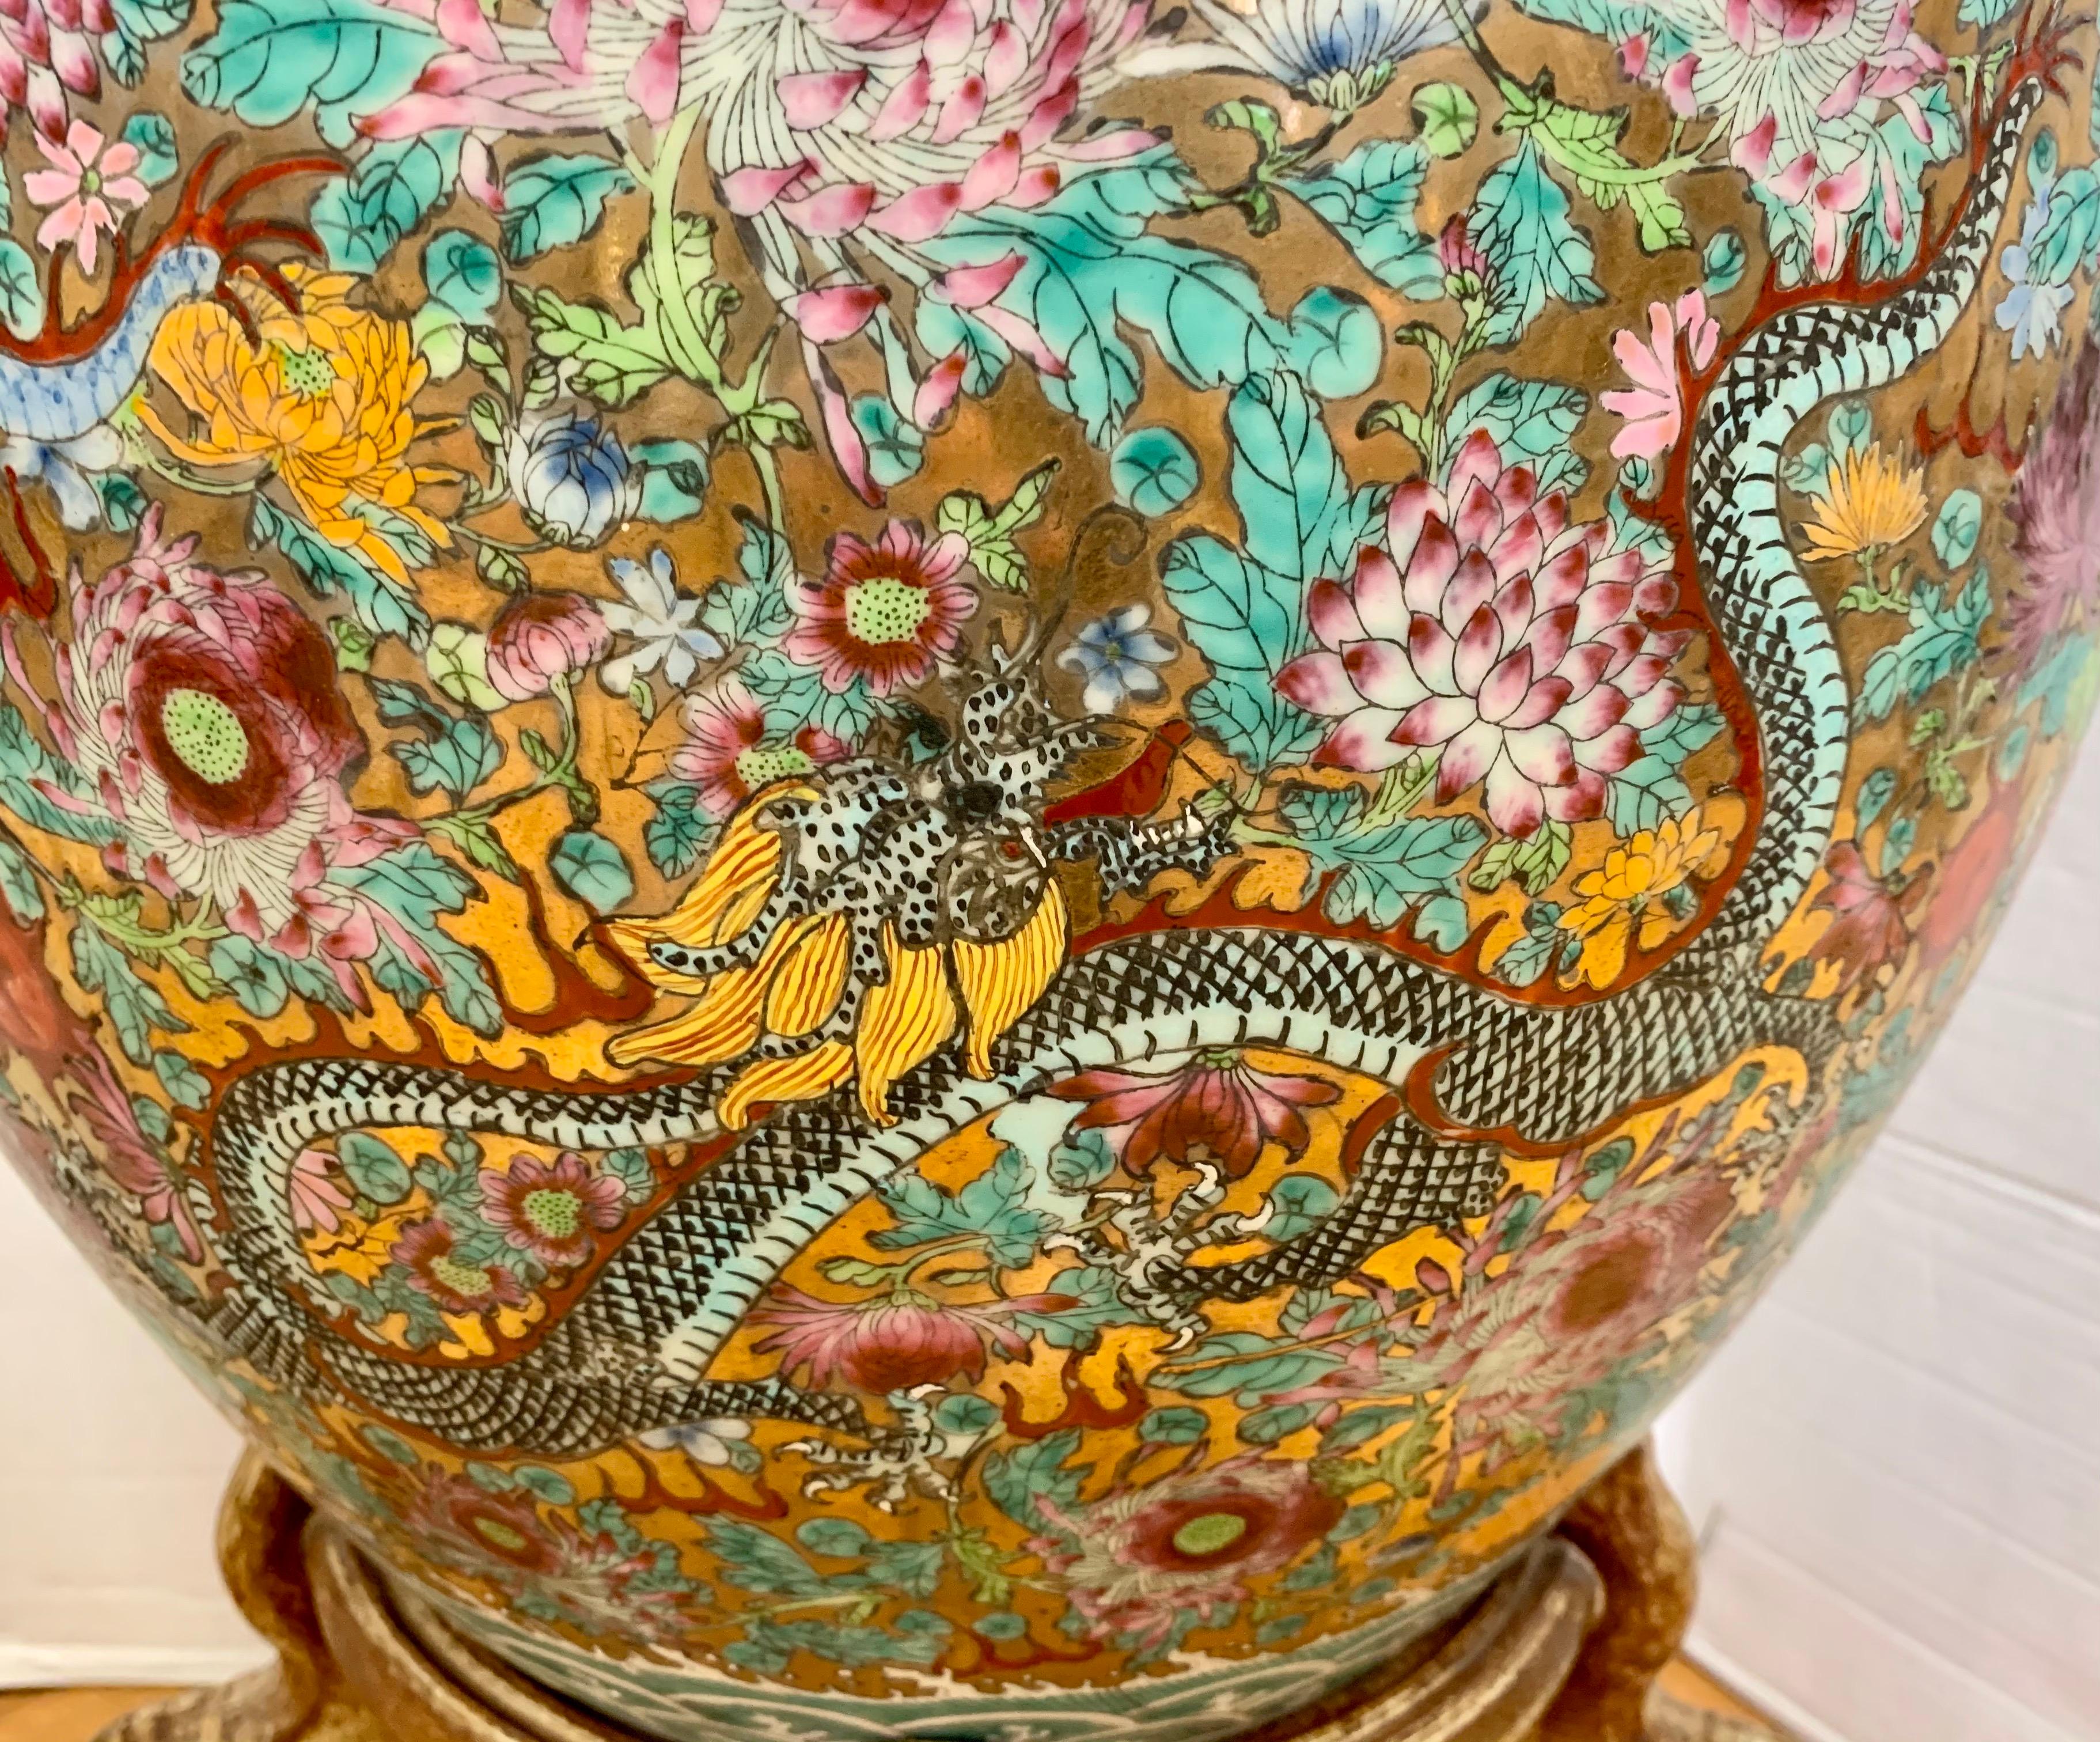 20th Century Chinese Porcelain Fishbowl Planter with Dragons on Carved Pedestal Stand